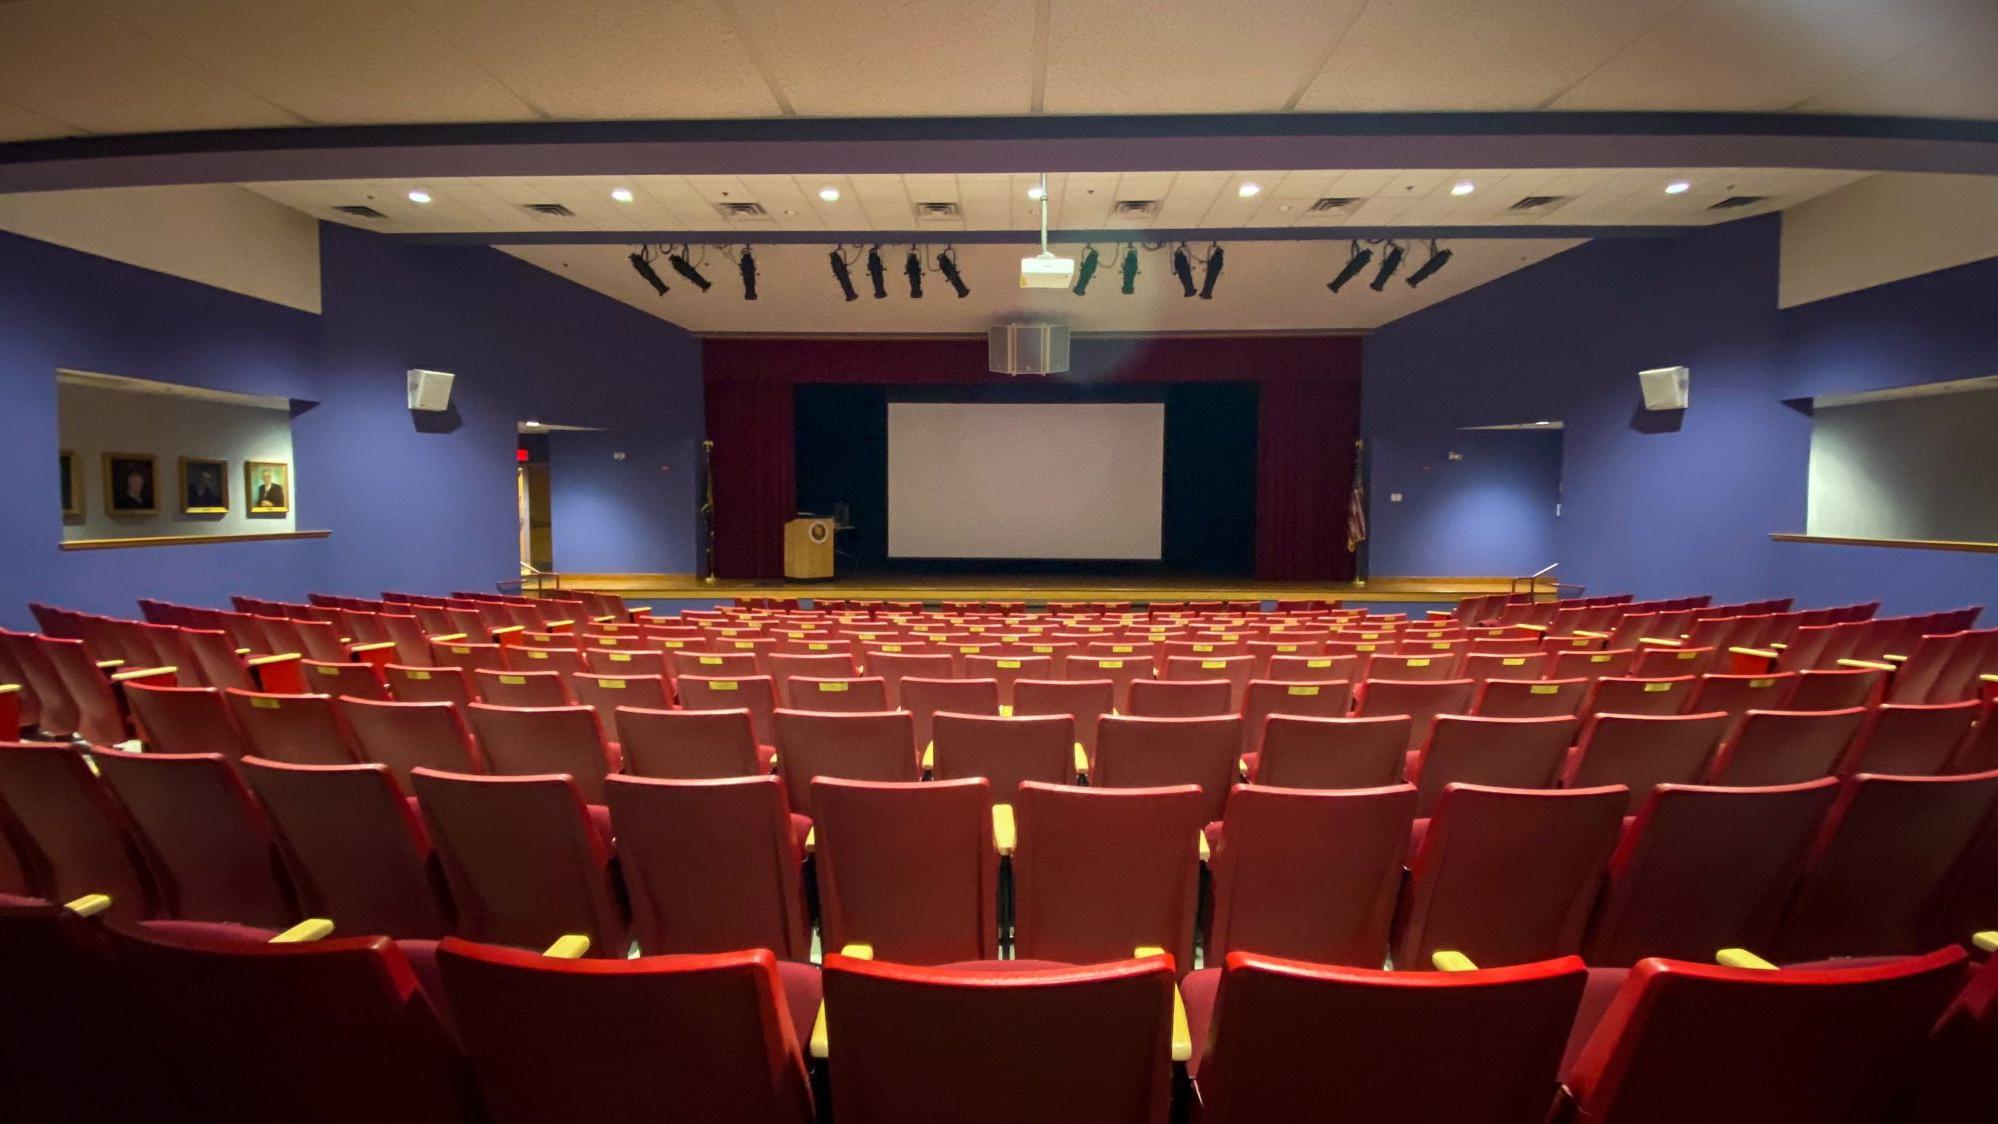 Auditorium stage with projector screen down; many red auditorium seats are in the foreground.